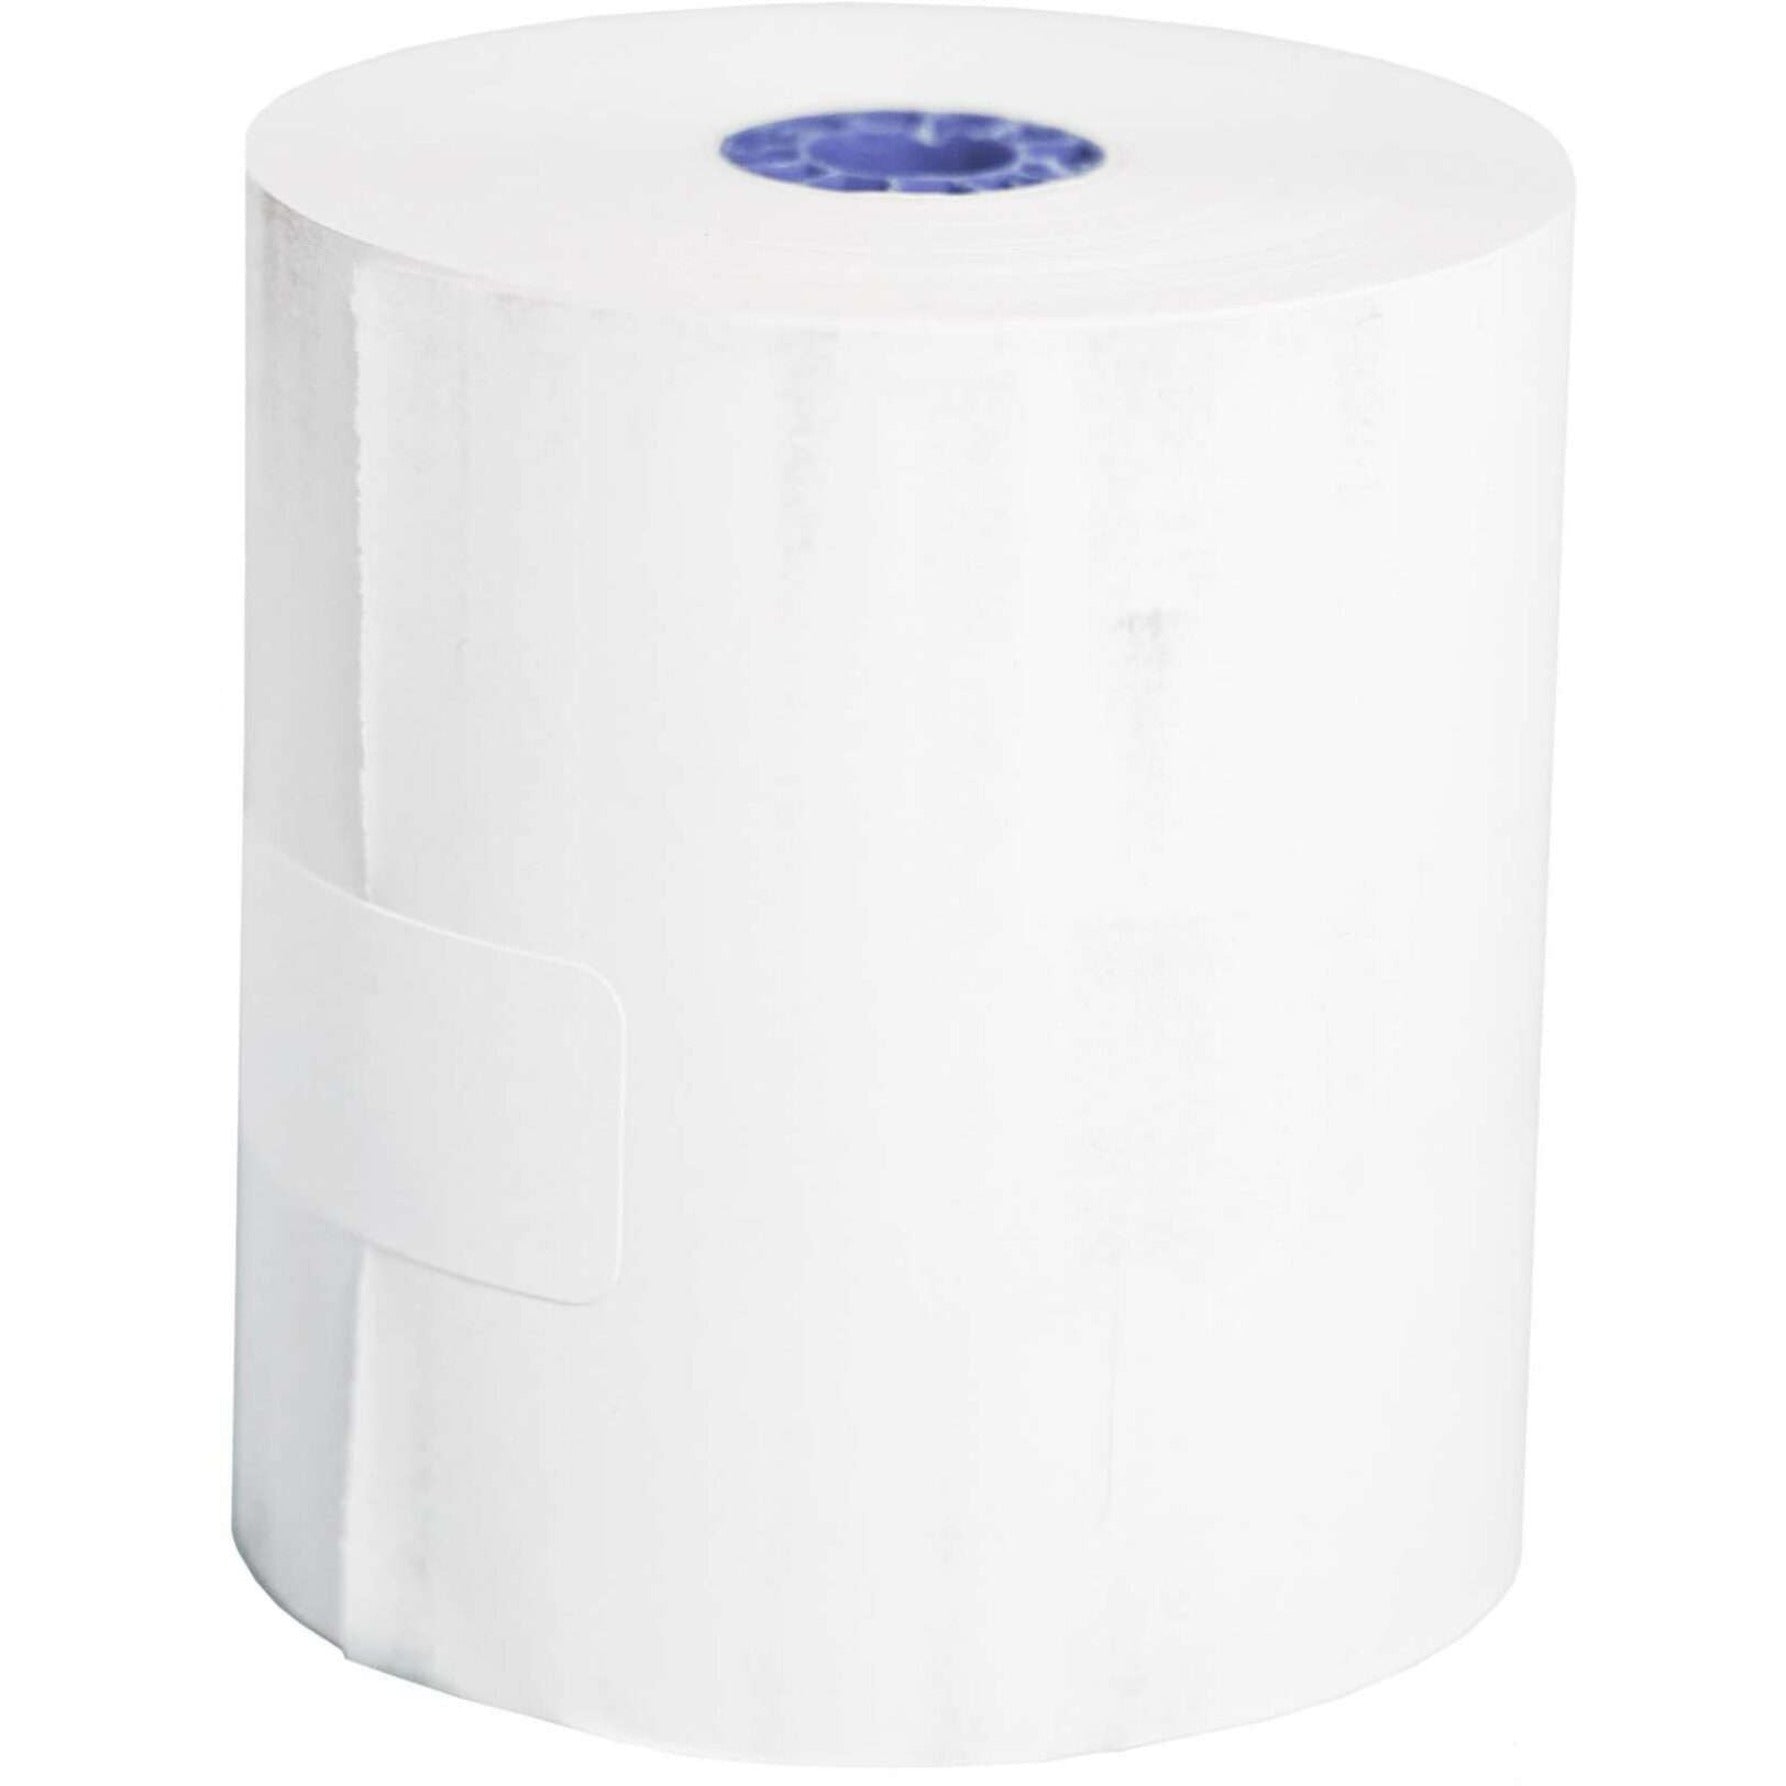 Star Micronics 37966290 Thermal Paper, 3 5/32" x 230 ft, 25 Roll